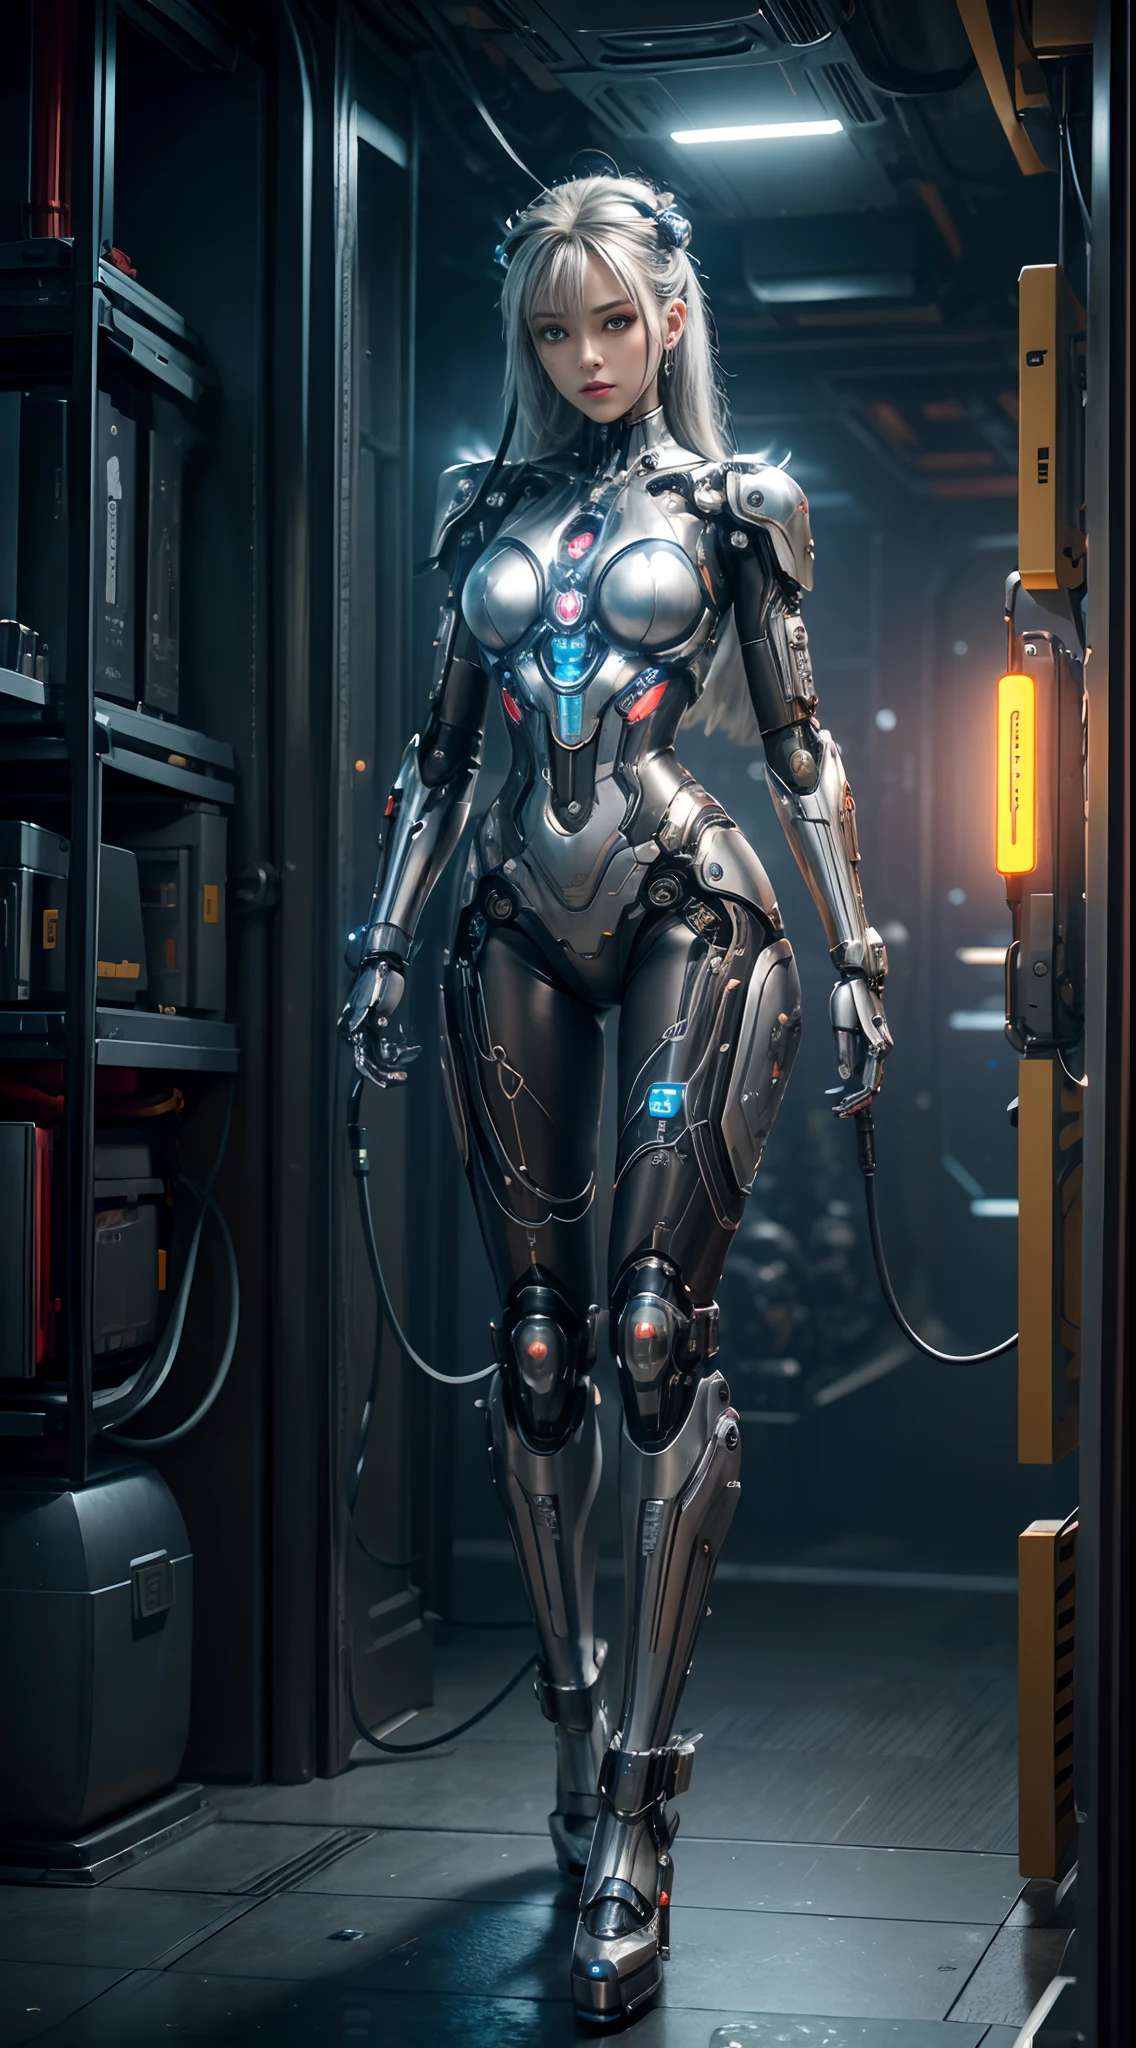 Best quality,A high resolution,Ultra-detailed,Physically-based rendering,Masterpiece:1.2,Robot Cyber Girl,Futuristic,Mechanical,
Vivid colors,Sharp focus,concept-art,metalictexture,Glowing lights,Sci-fi,Electronic atmosphere,neon accents,Technological progress,The world of numbers,Advanced machinery,
Cyberpunk design,Sleek and modern,Mechanical prosthetics,High-tech accessories,Complex wiring and circuitry,Software and algorithms,Artificial intelligence,digital transformation,
number tattoo,Glowing eyes,Precision and accuracy,Silver and chromium elements,Exquisite craftsmanship,Technology evolution,Artistic interpretation